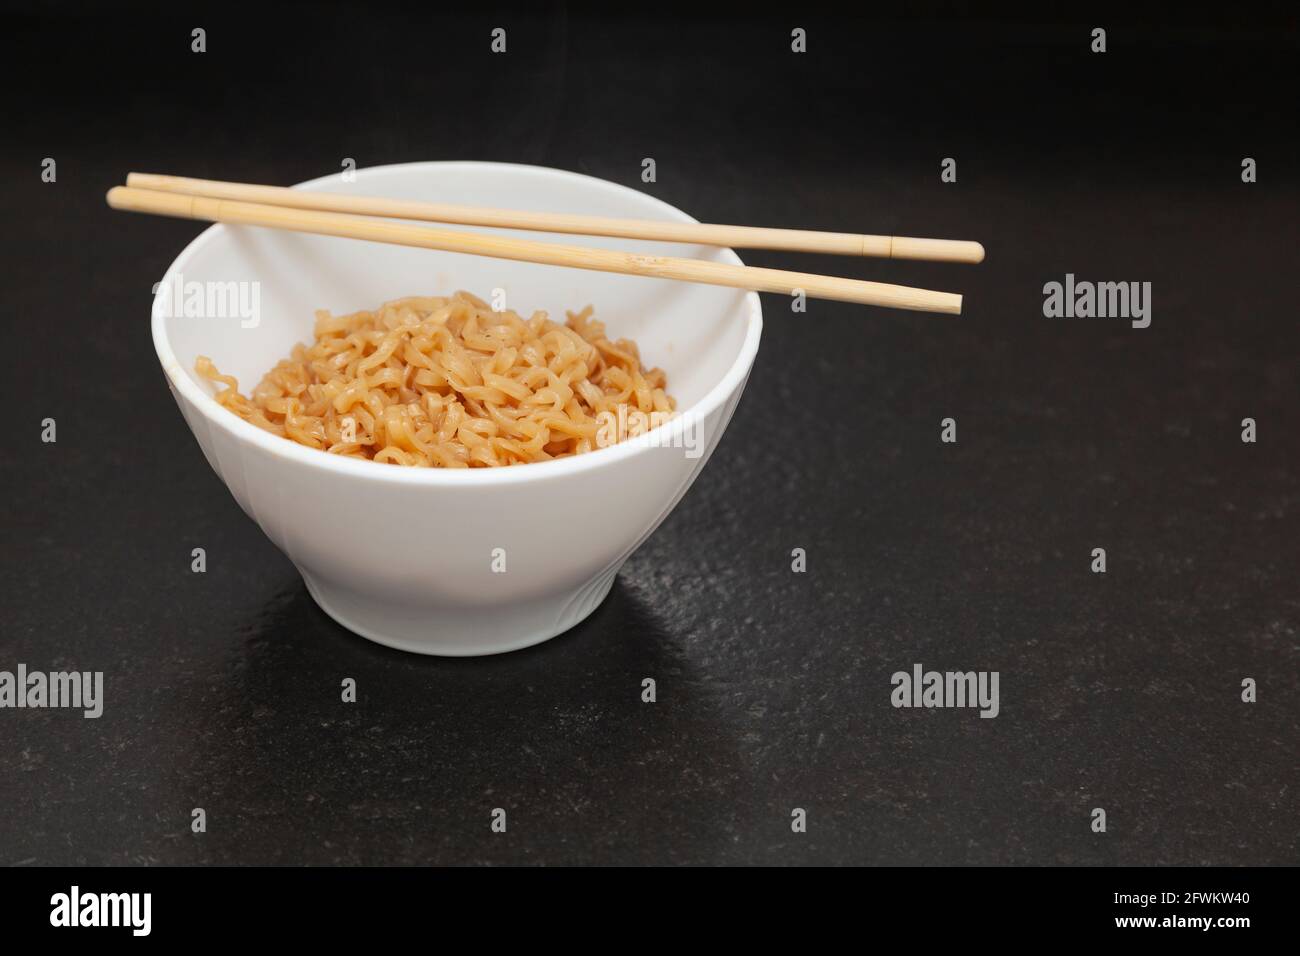 A kitchen bowl with ready-to-eat Chinese noodles. On the bowl are some oriental chopsticks. It is placed on a black granite bench in a kitchen and is Stock Photo